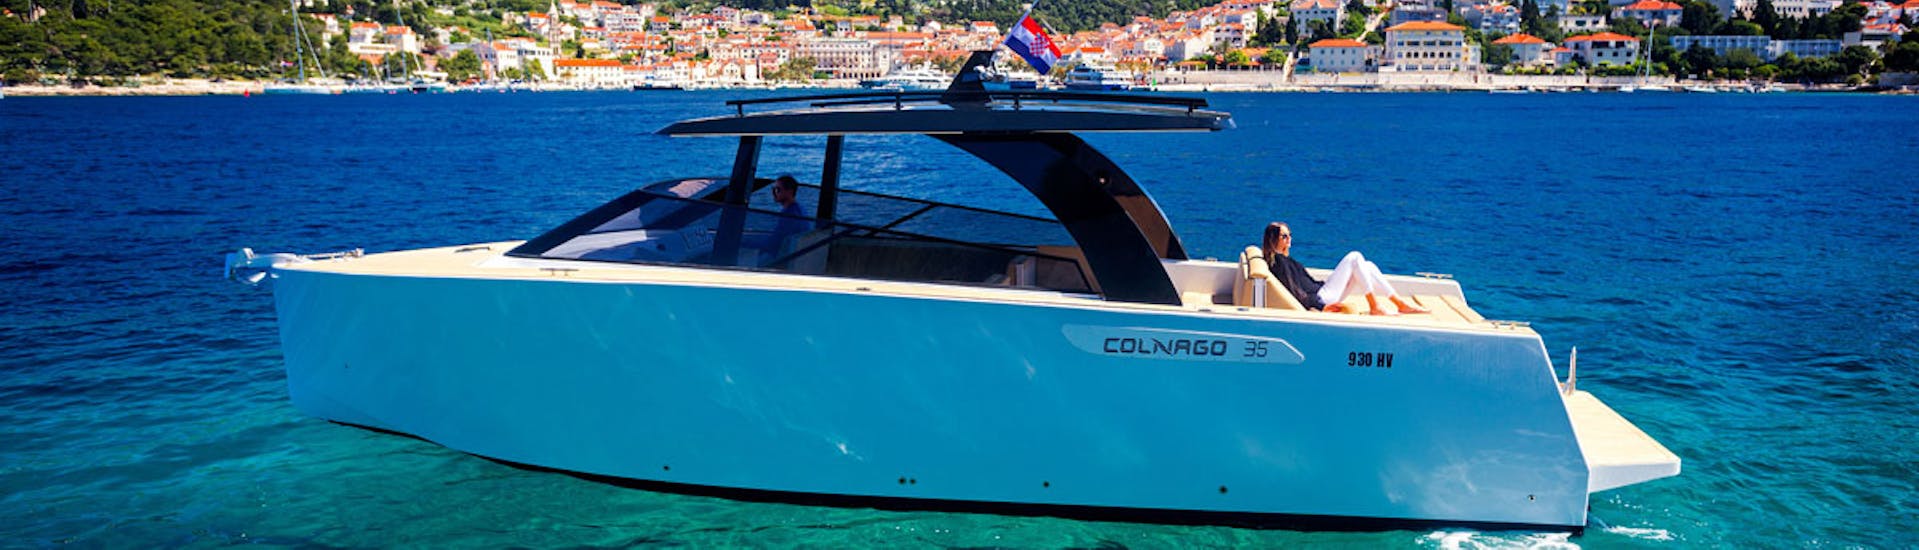 Picture of the luxury boat Colnago 33 with woman laying in the back and the background of the coast of Hvar.